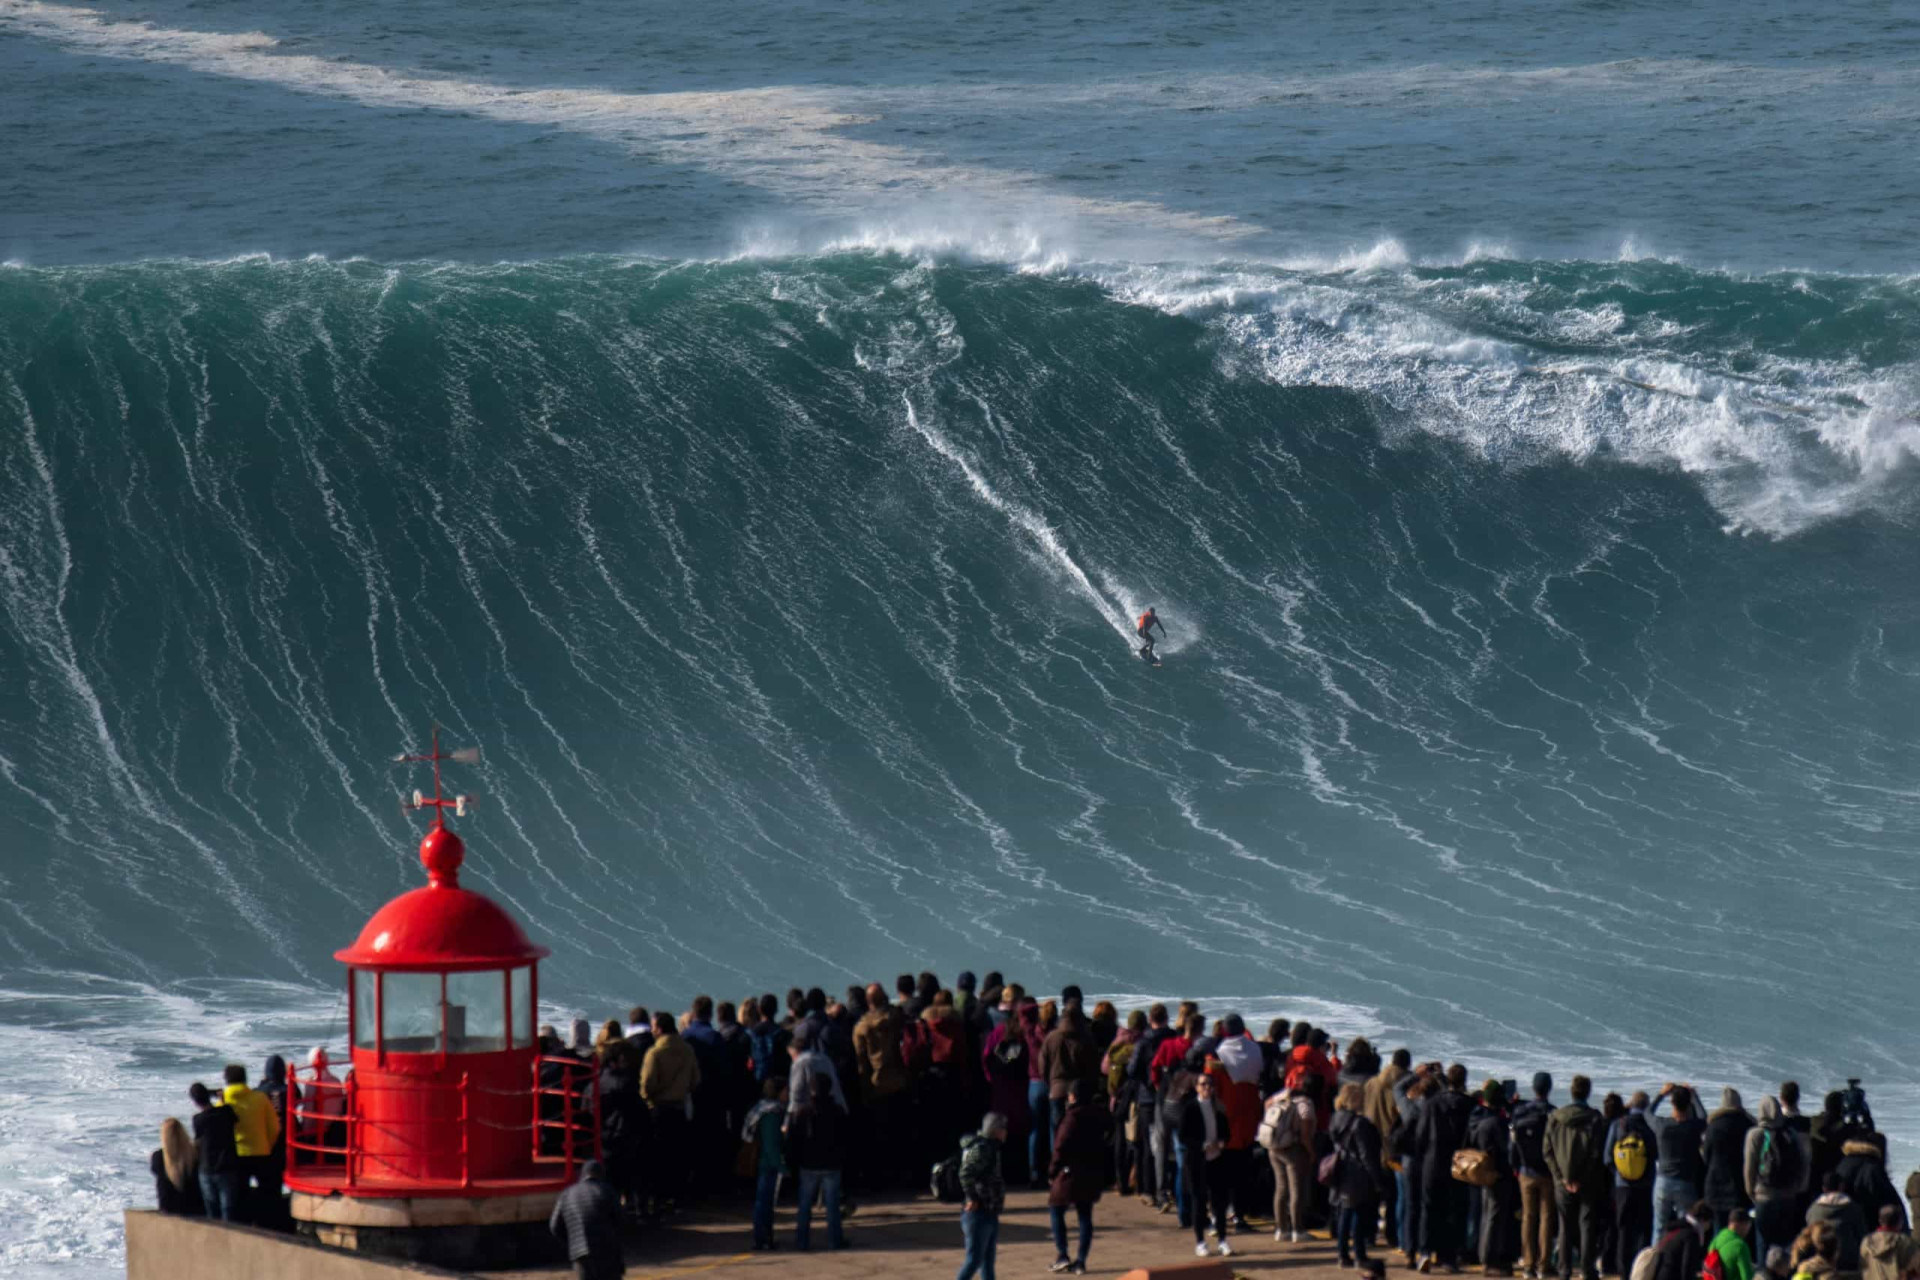 Nazaré: the biggest waves in the world